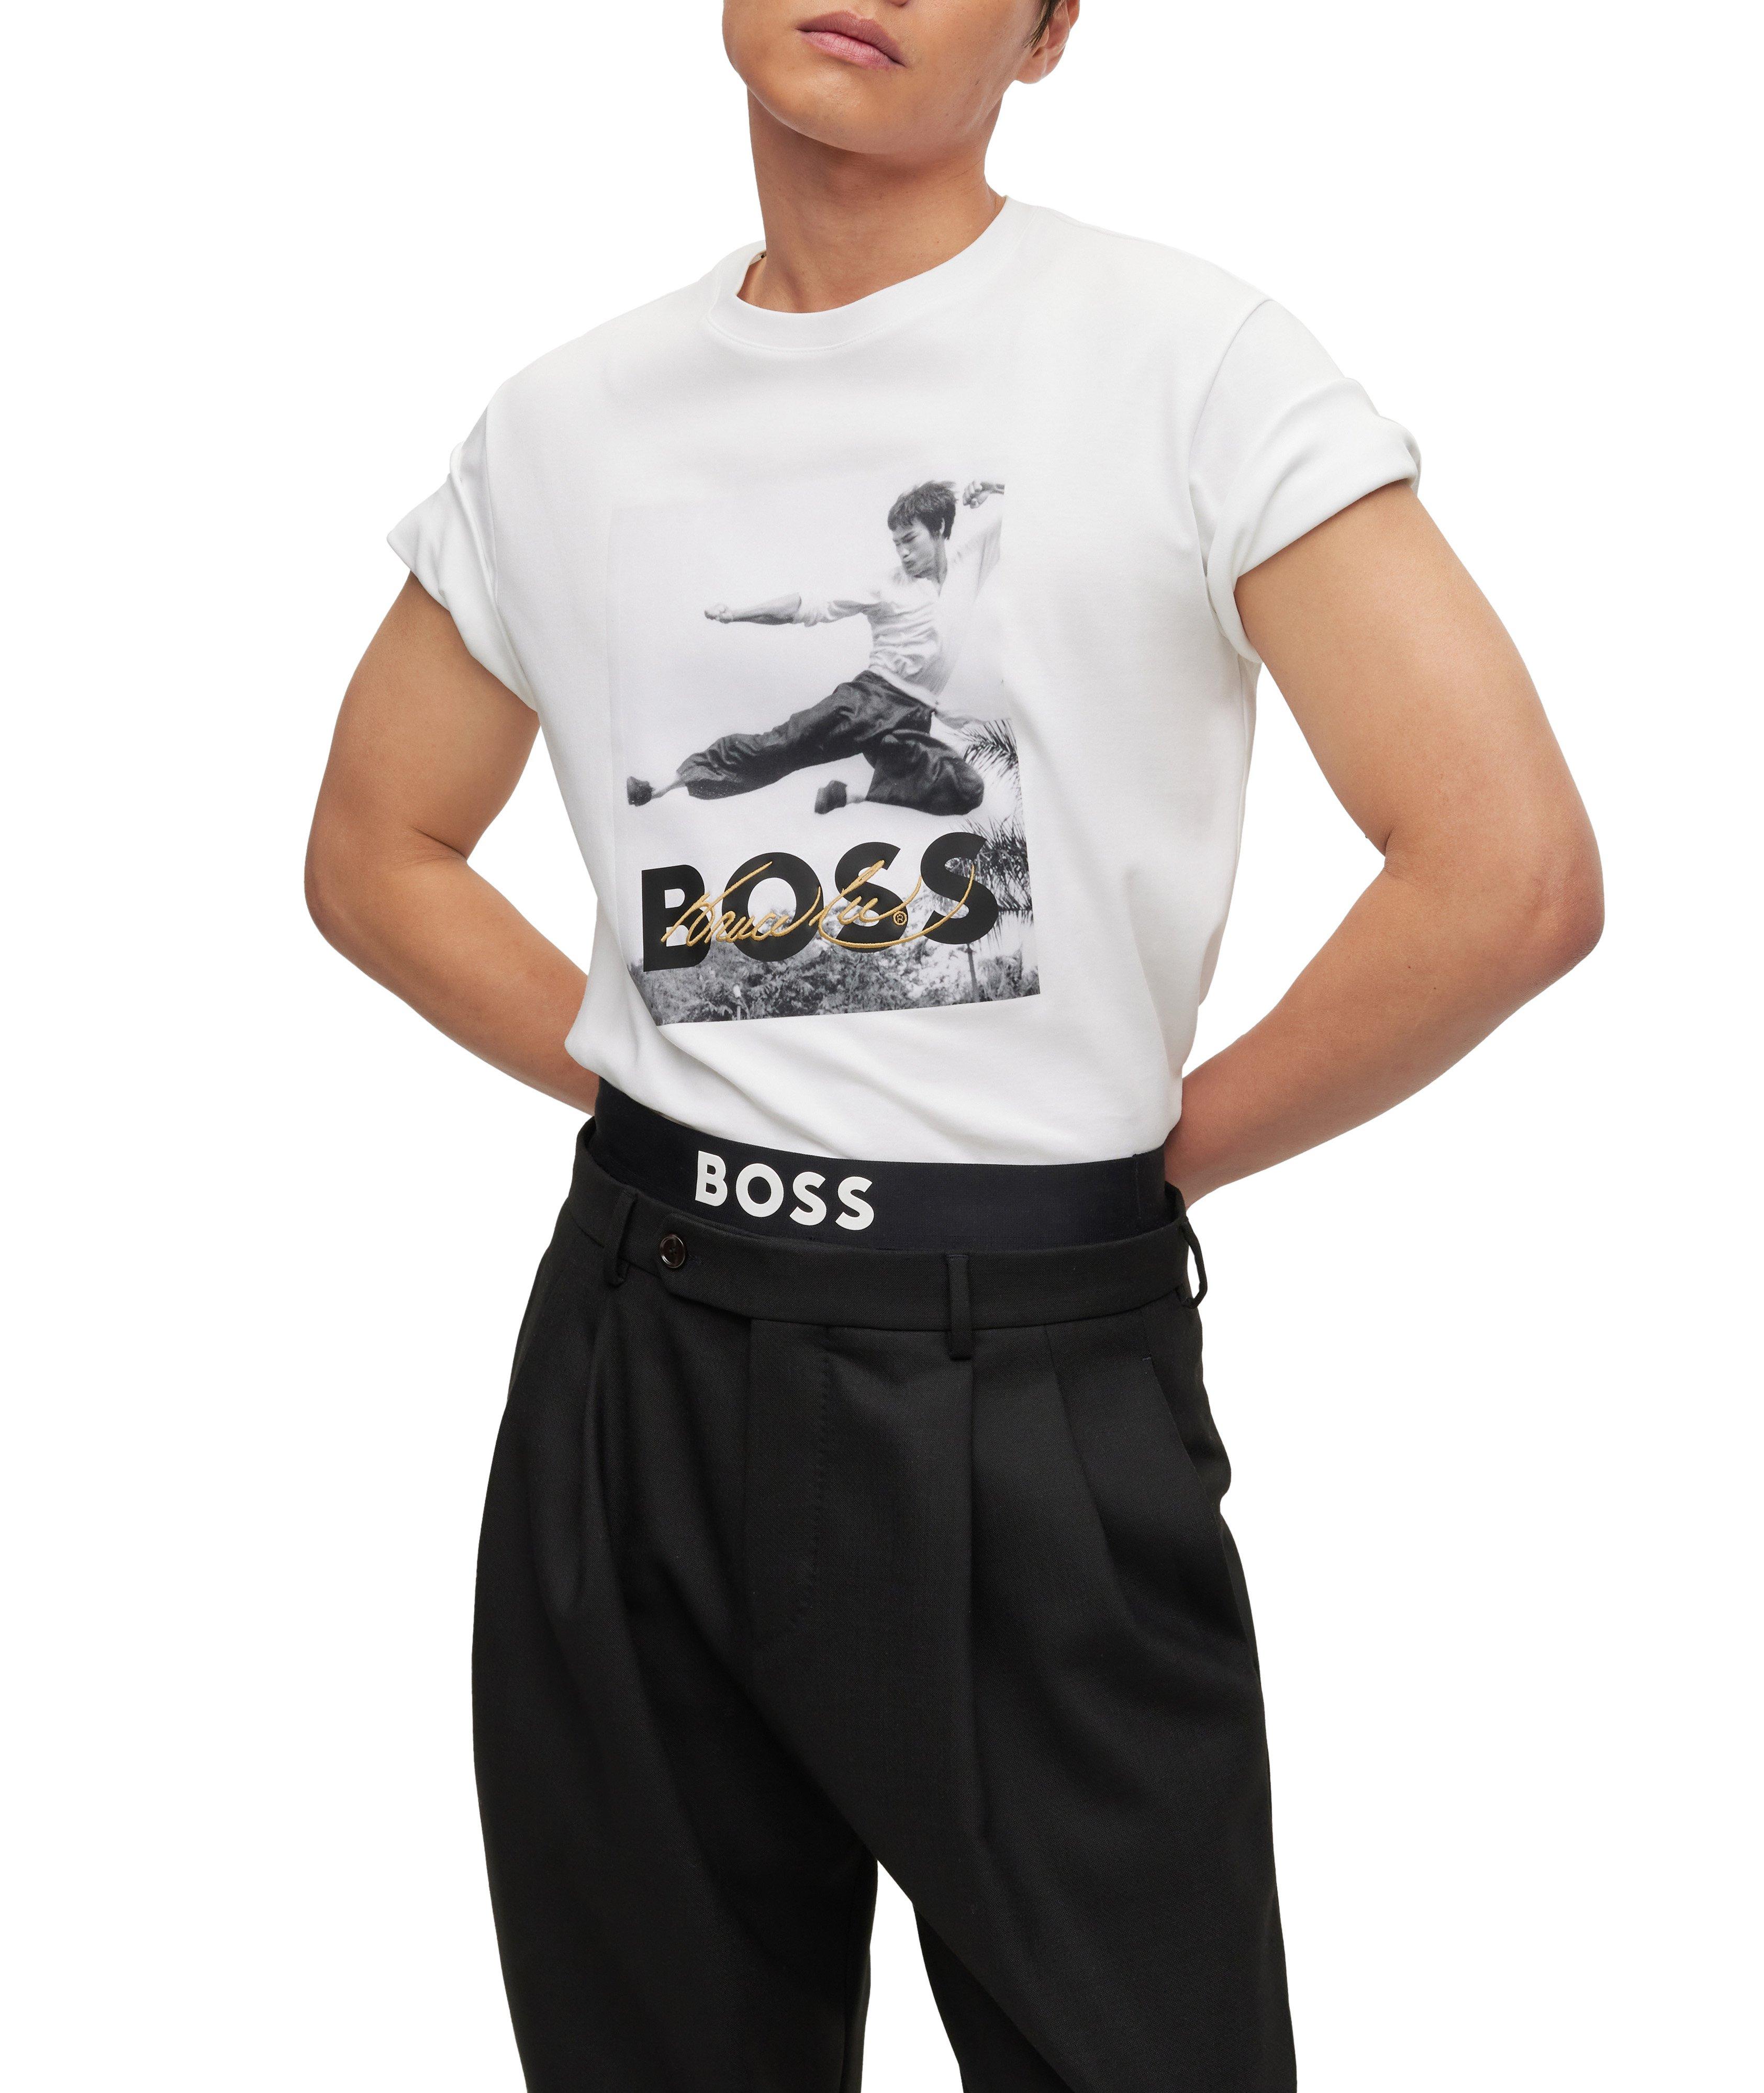 BOSS Legends Bruce Lee Collection Printed T-Shirt image 1